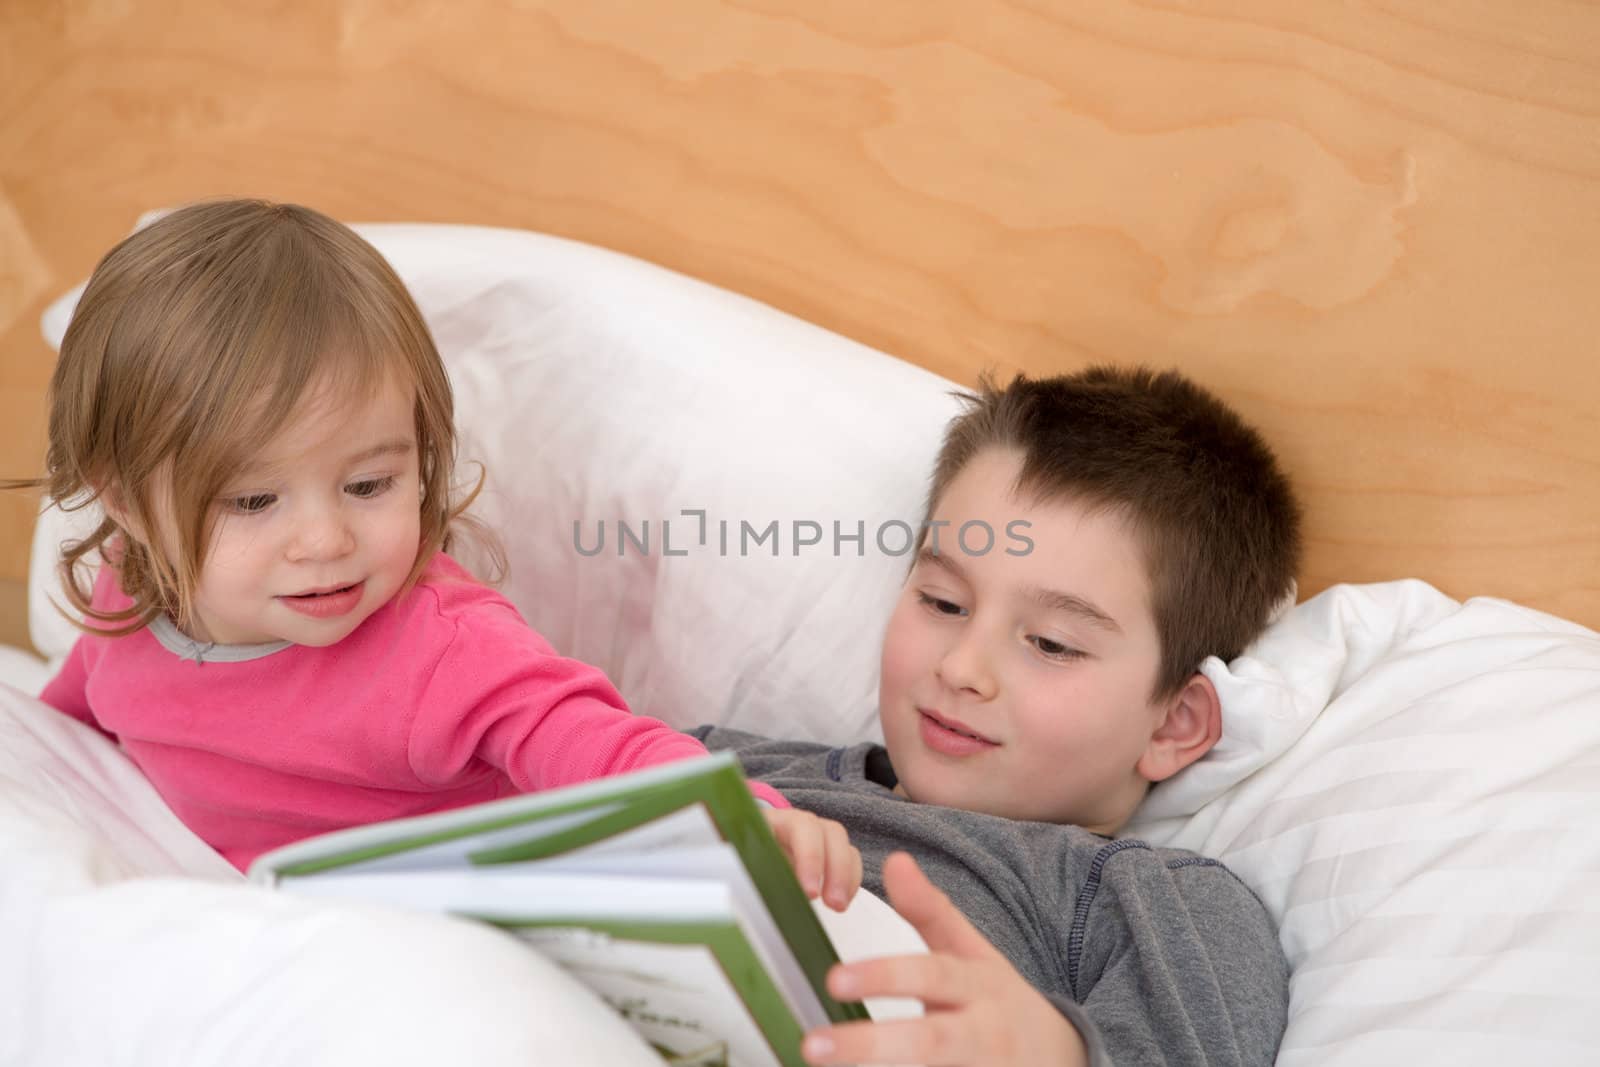 Little sister asking a question to his older brother about a page in the book before they go to sleep.